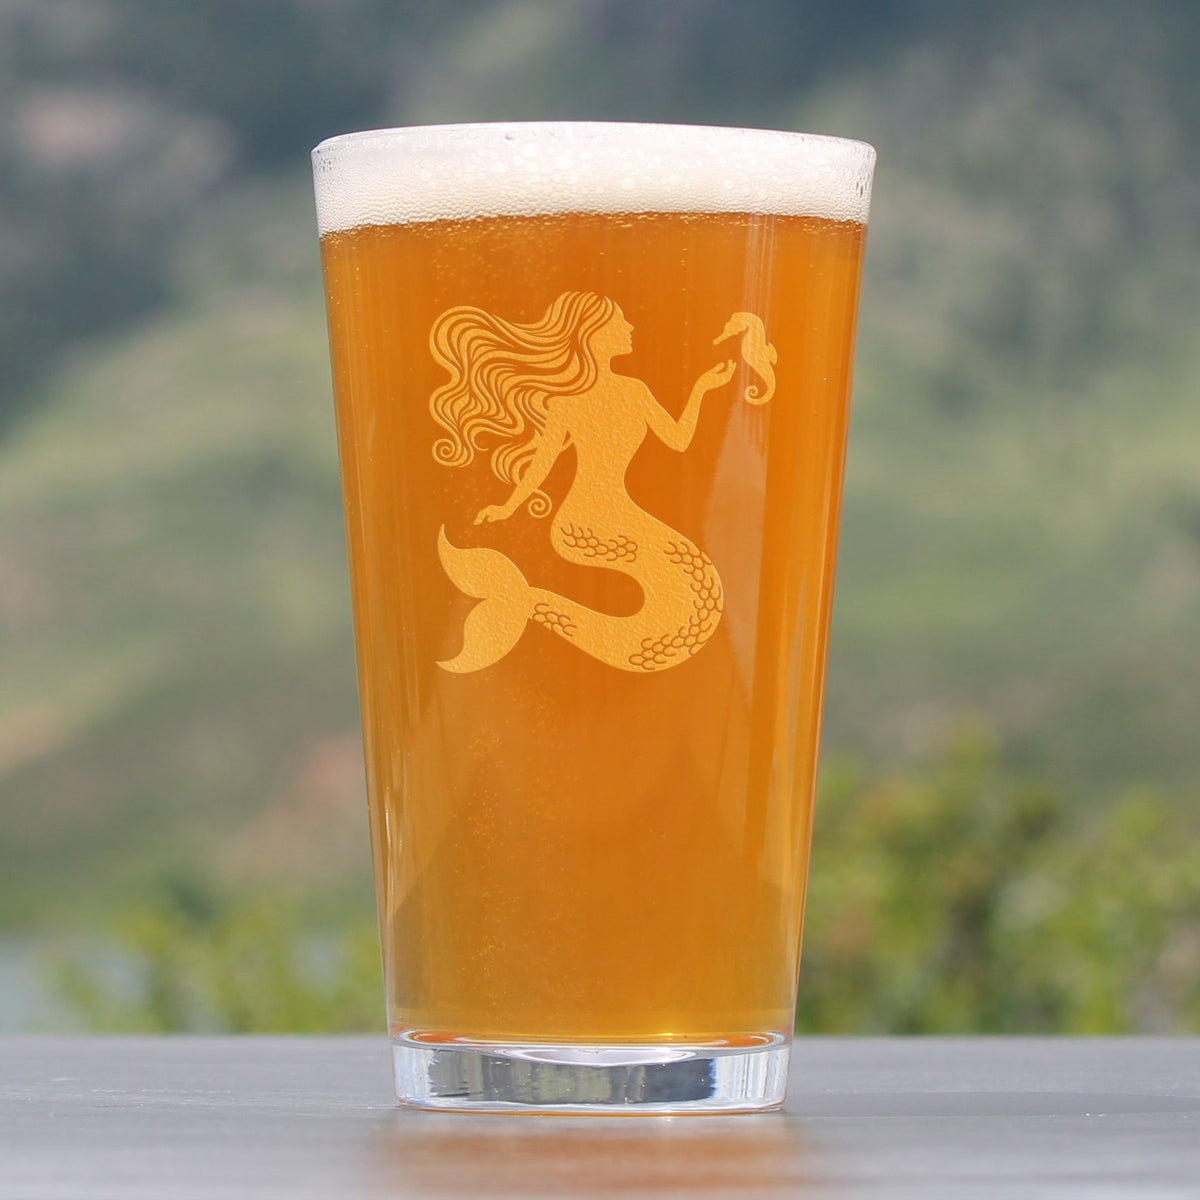 Mermaid Pint Glass for Beer - Fun Mermaids Themed Decor and Gifts for Beach Lovers - 16 Oz Glasses